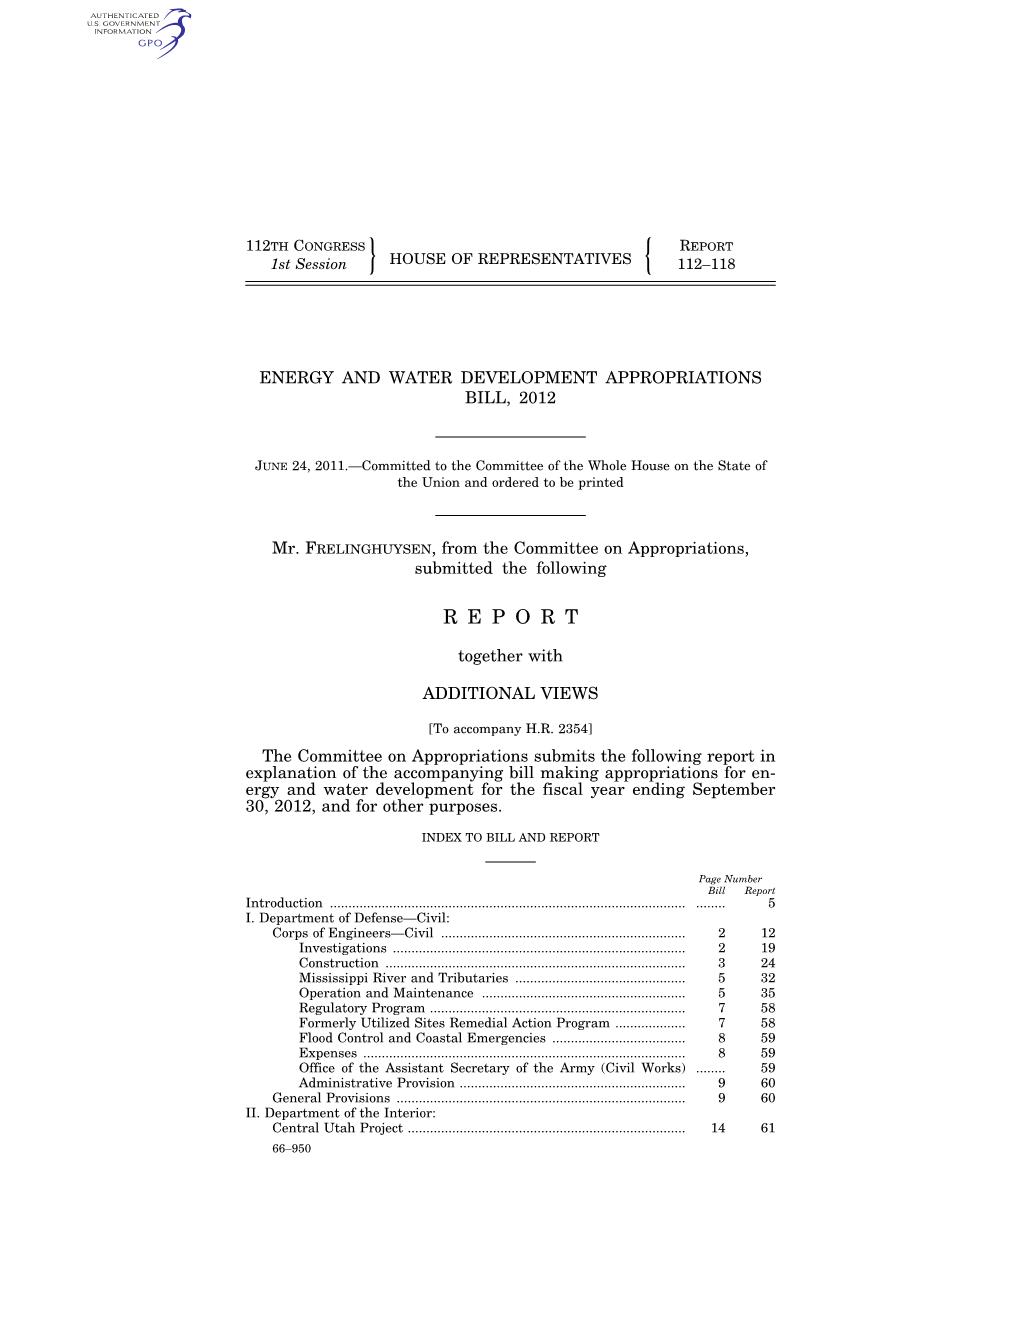 Energy and Water Development Appropriations Bill Report